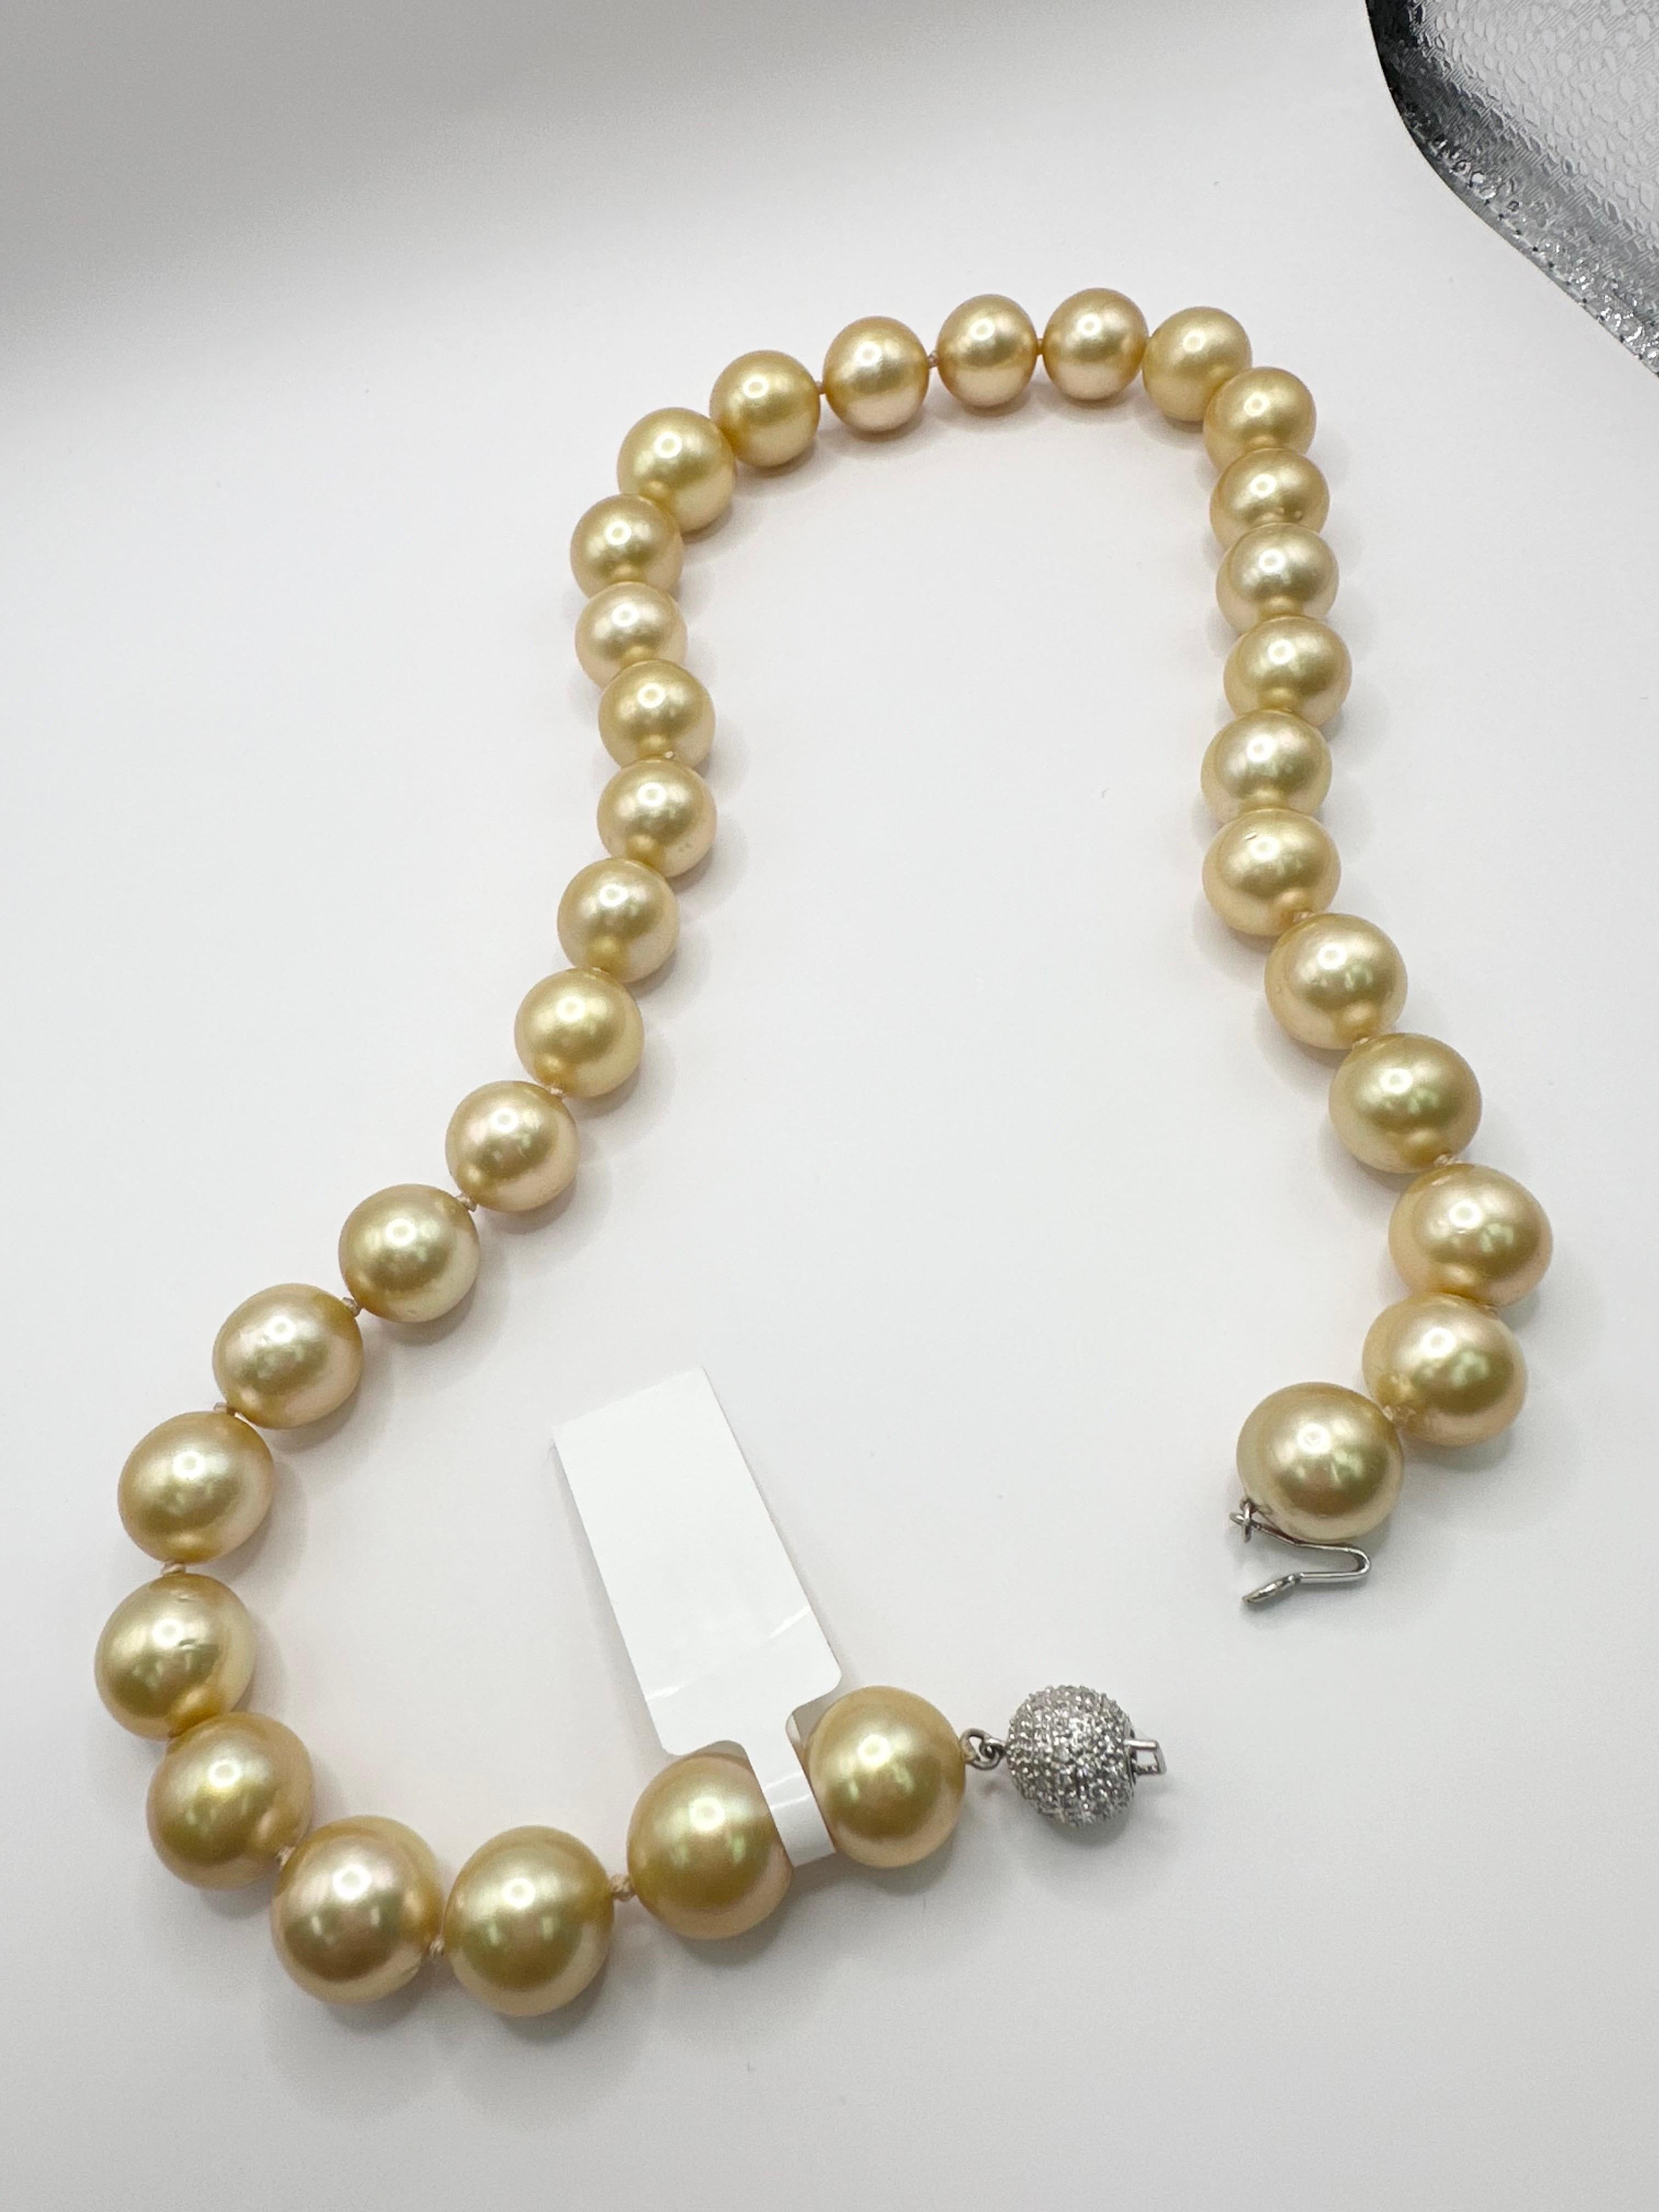 Diamond South Pearl necklace 18